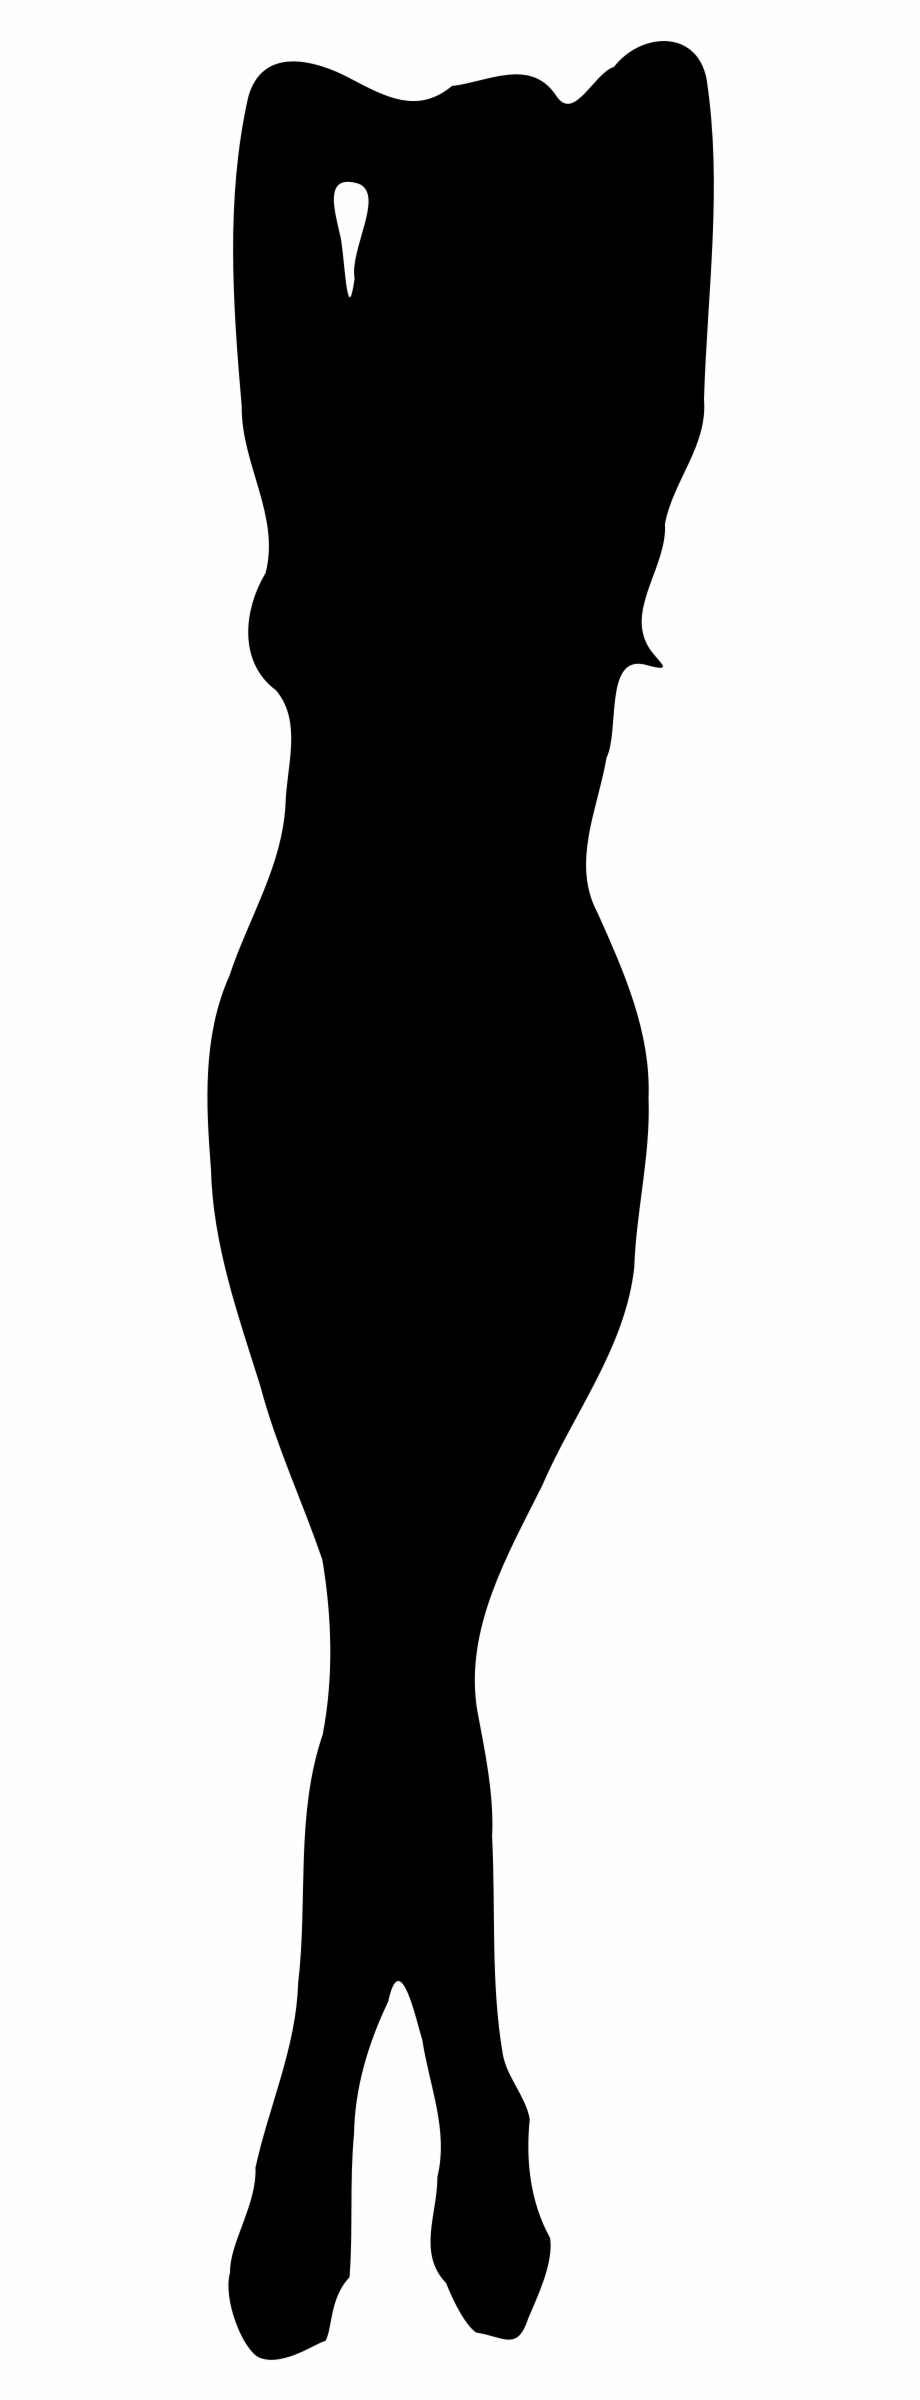 Female Silhouette Clip Art At Getdrawings Silhouette Of